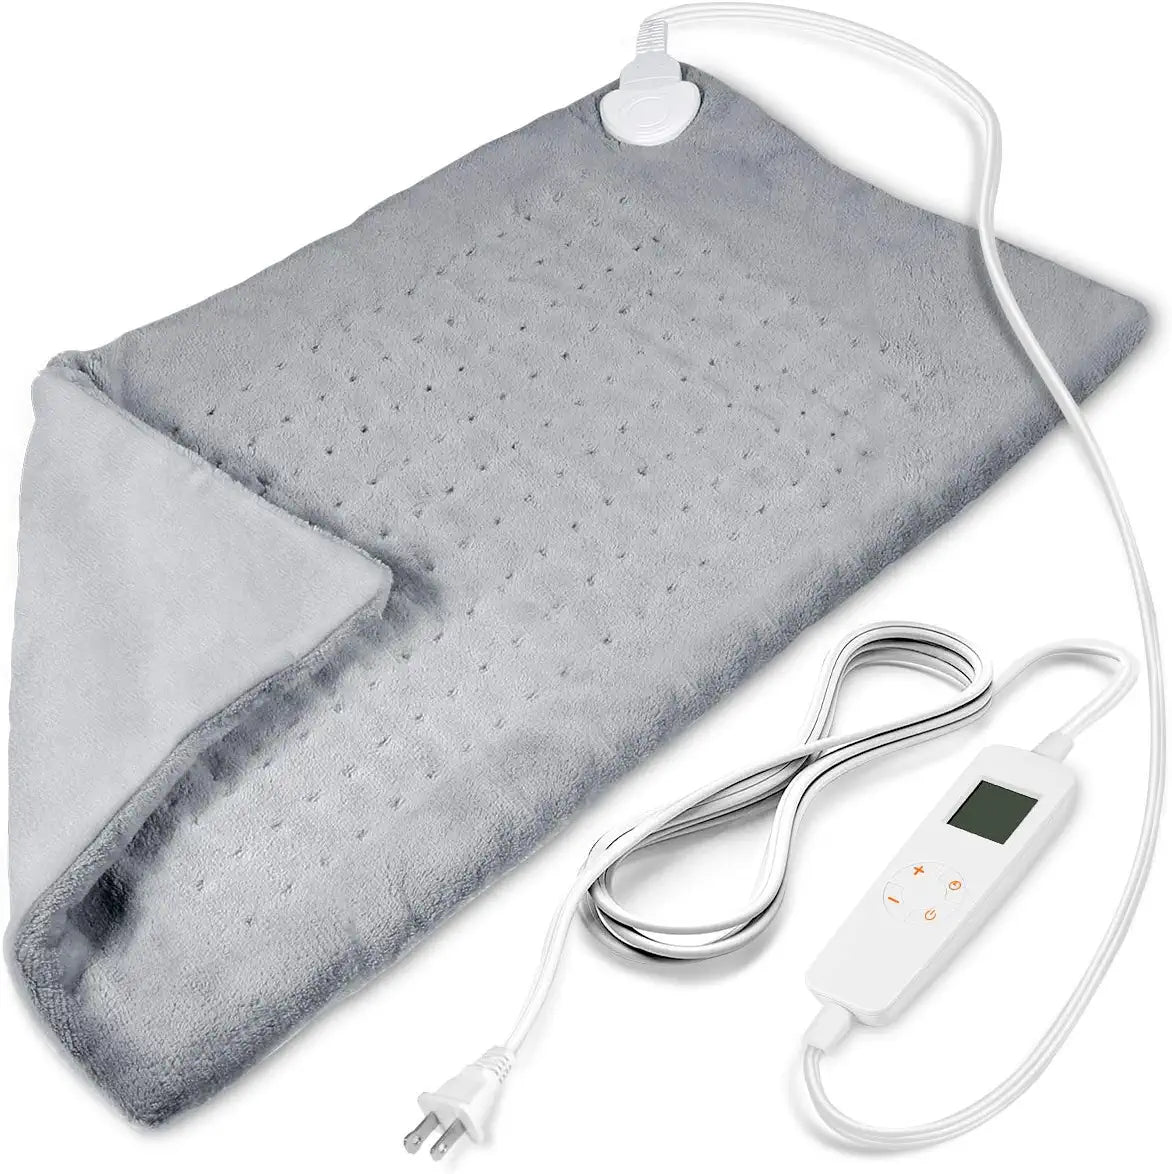 Large Heating Pad for Back Pain Relief, Electric with 6 Heat Settings & Auto Shut Off, Weighted Pads Moist Dry Therapy, Pet Pad, Machine Washable, 12*24Inch,Gray